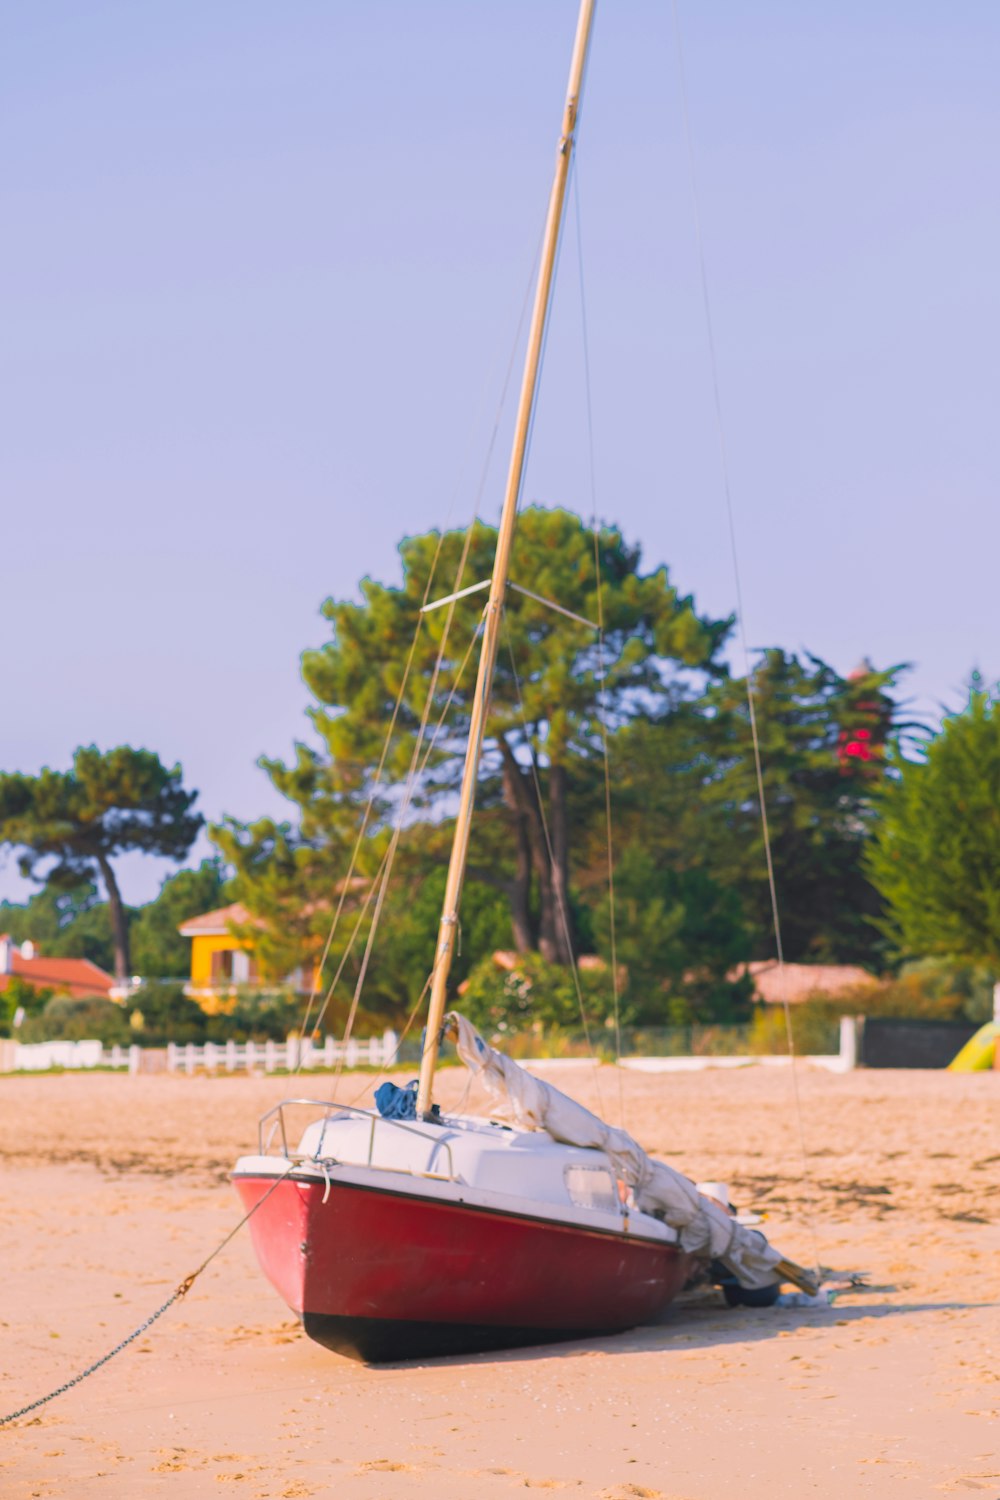 a small sailboat on the beach with trees in the background